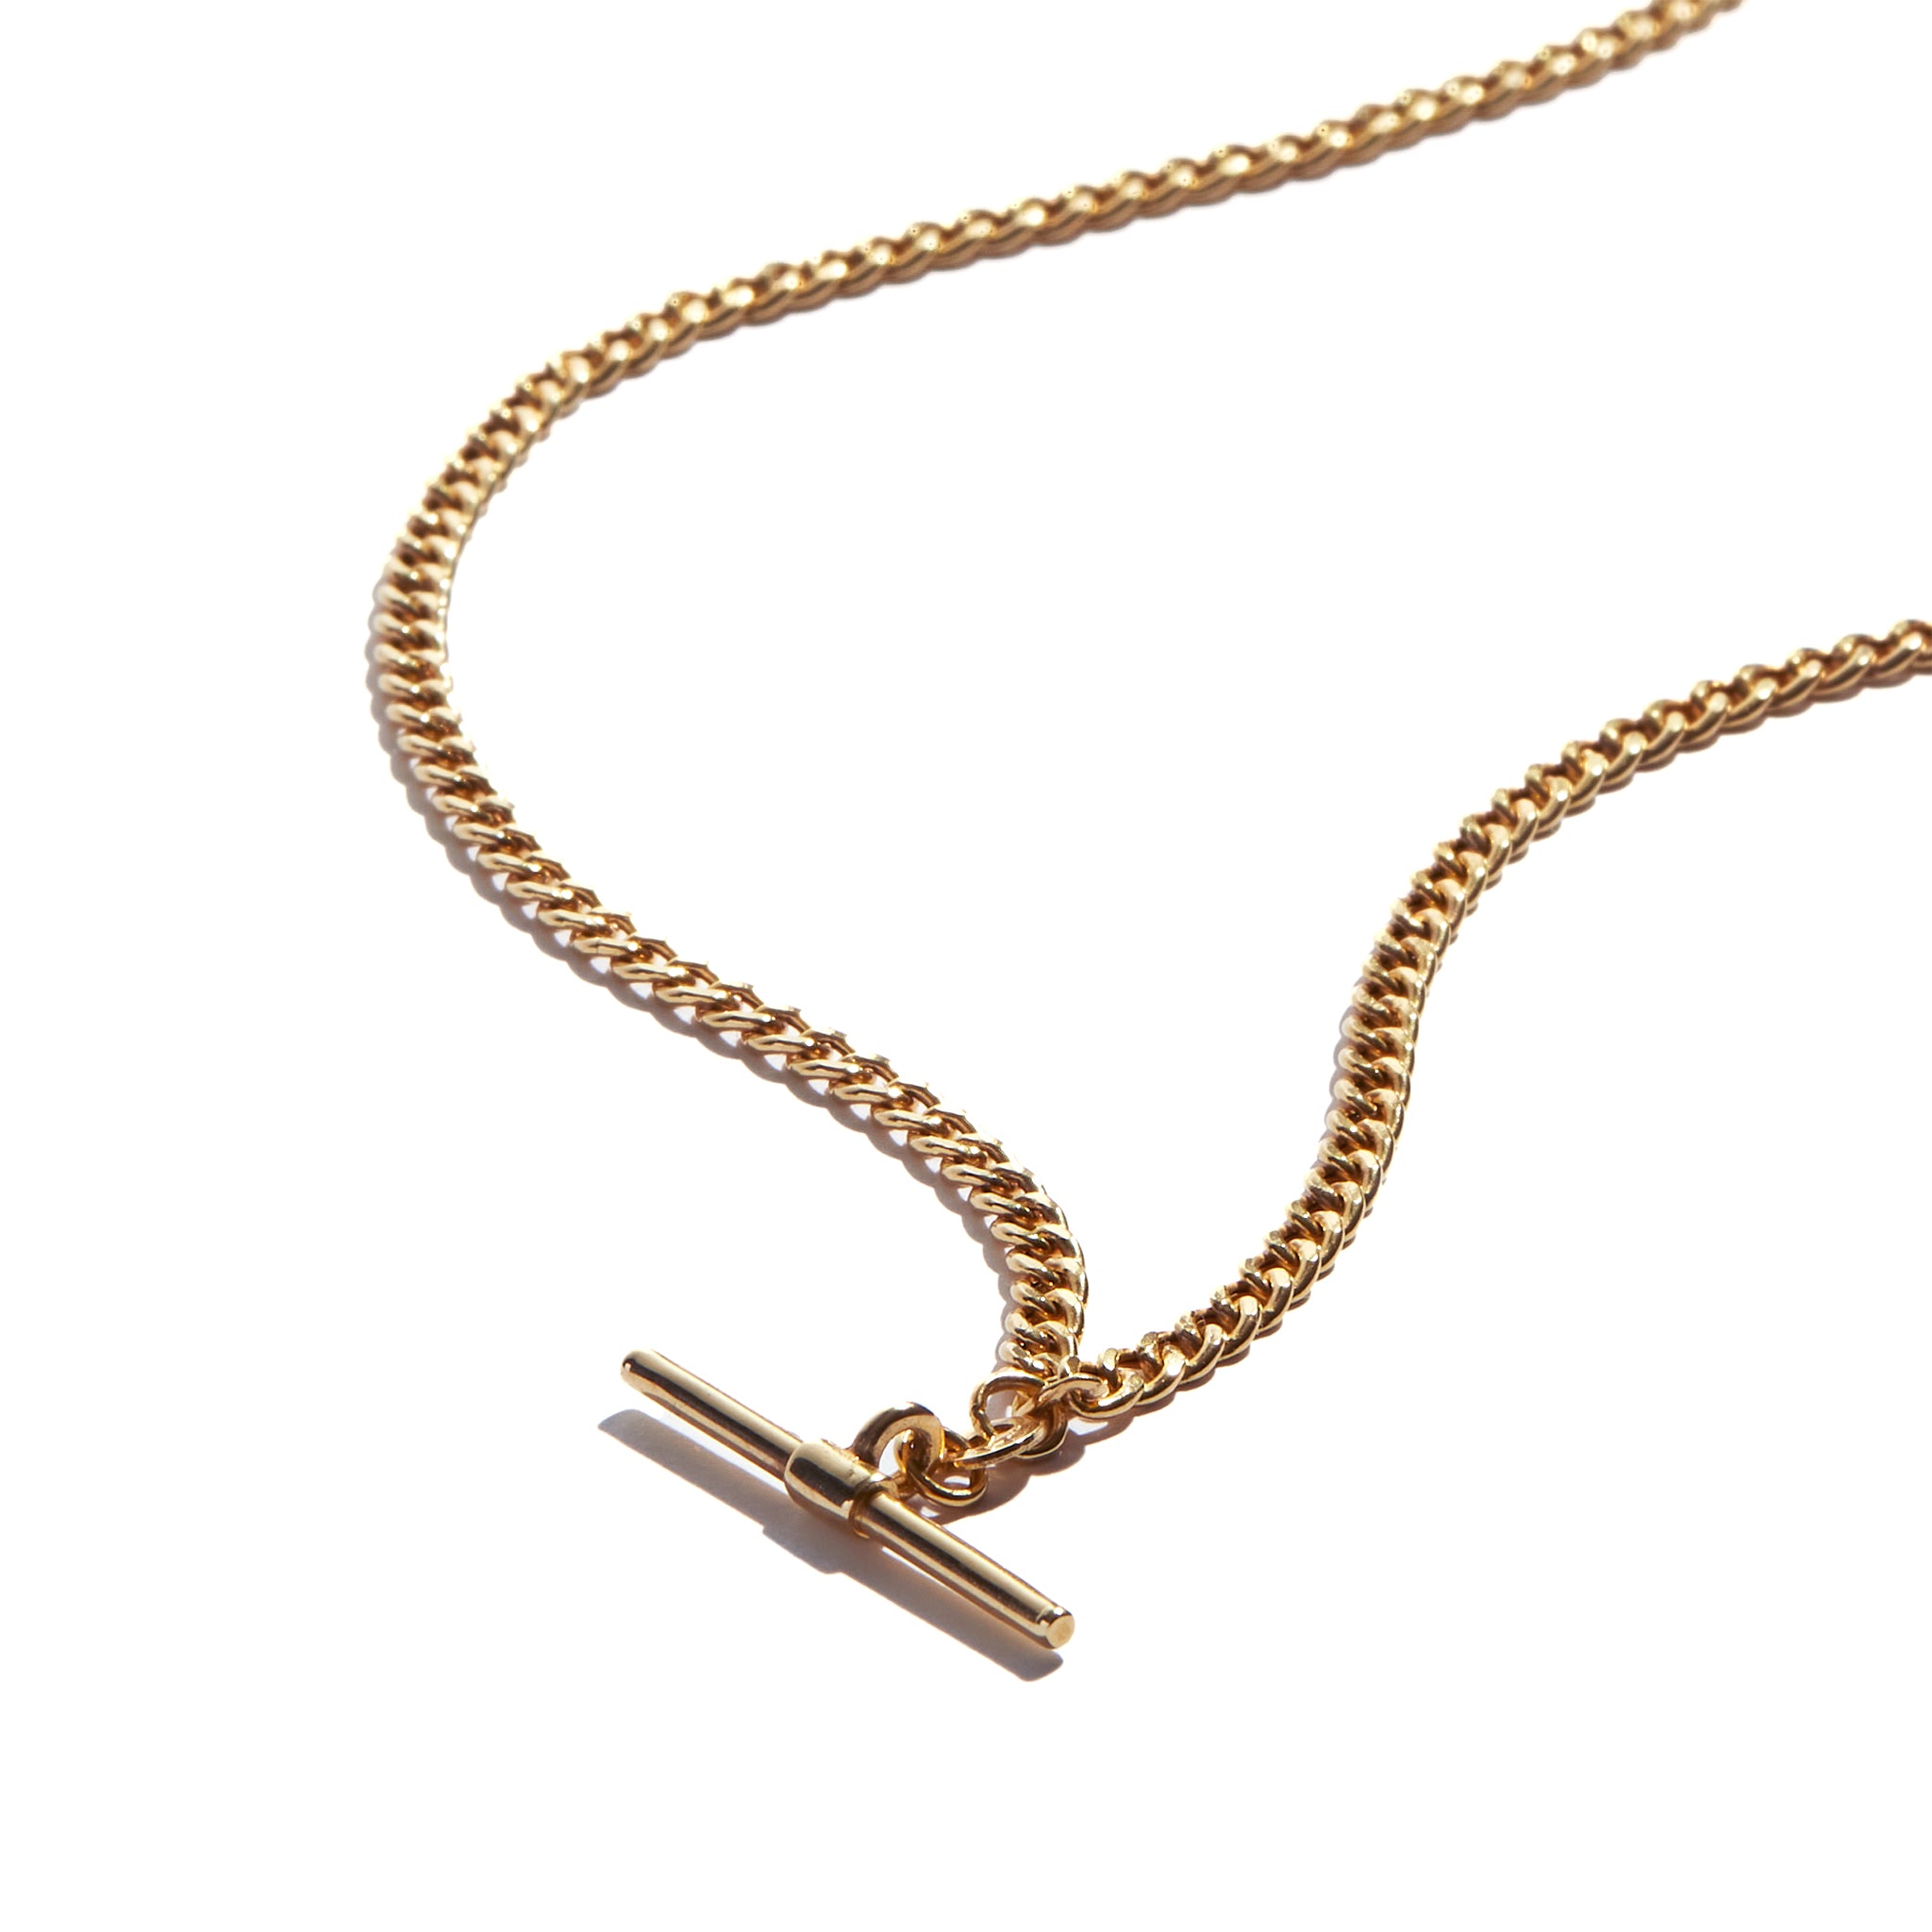 Strathberry - Mosaic Pendant Necklace - Gold | Strathberry